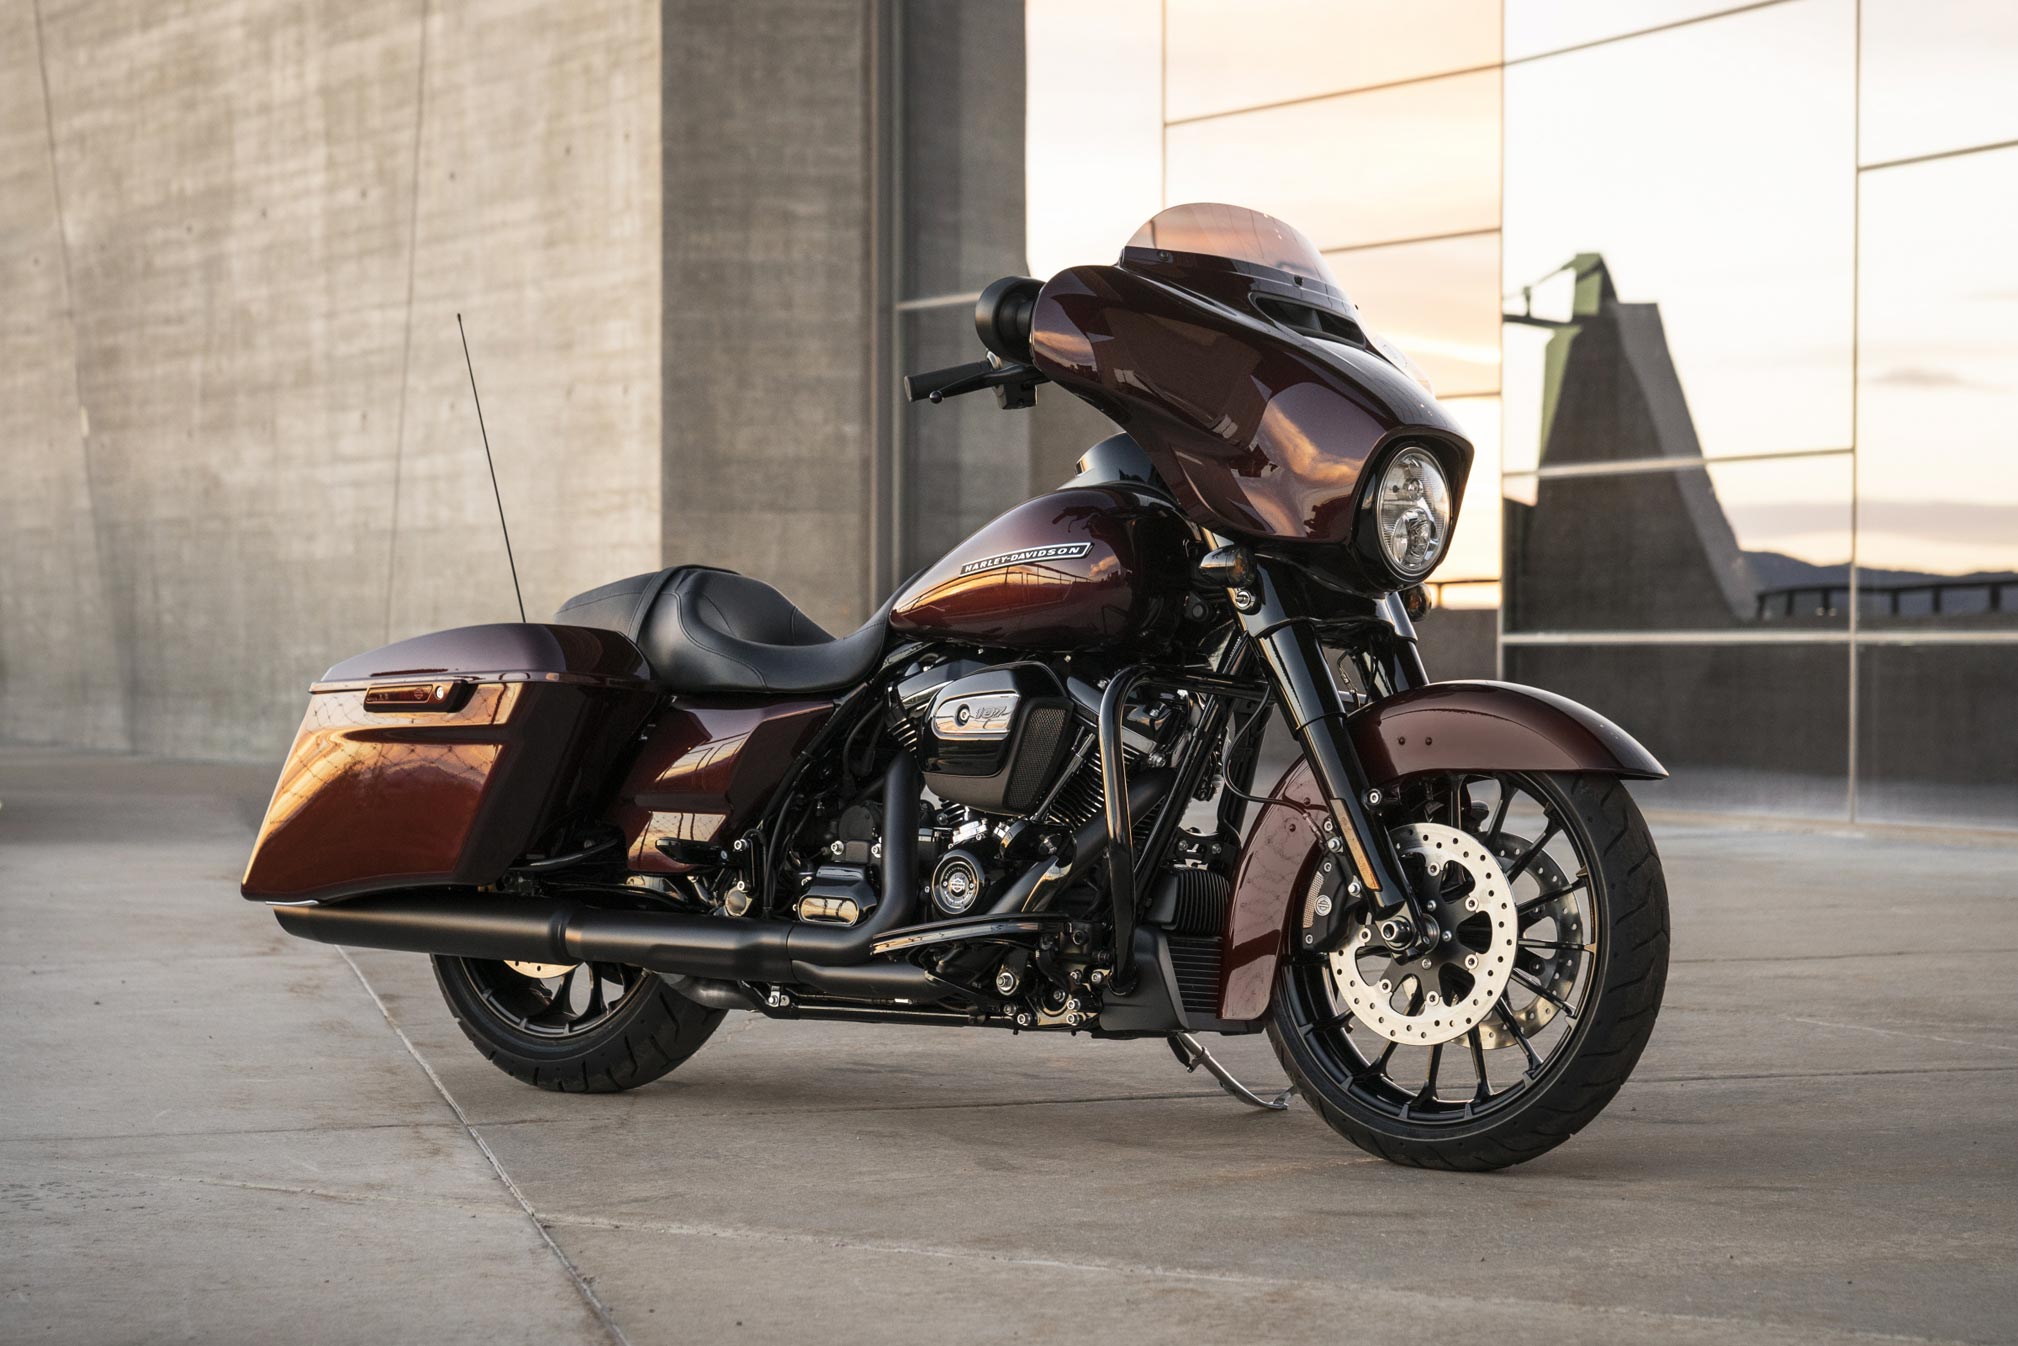 2018 Harley Davidson Street Glide Special Review Total Motorcycle